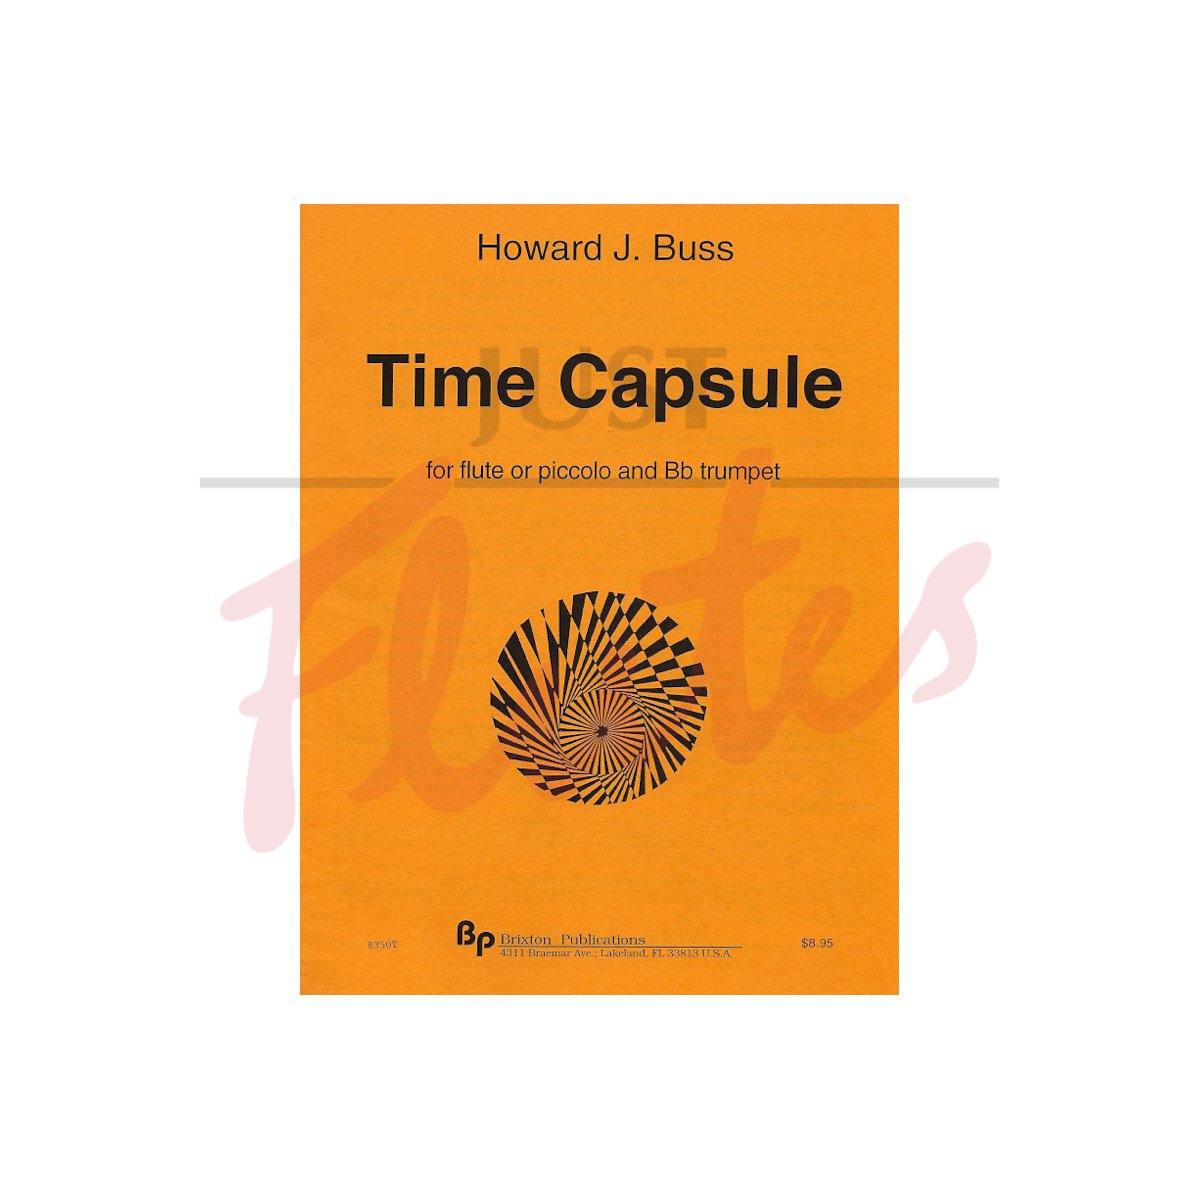 Time Capsule for Flute and Trumpet